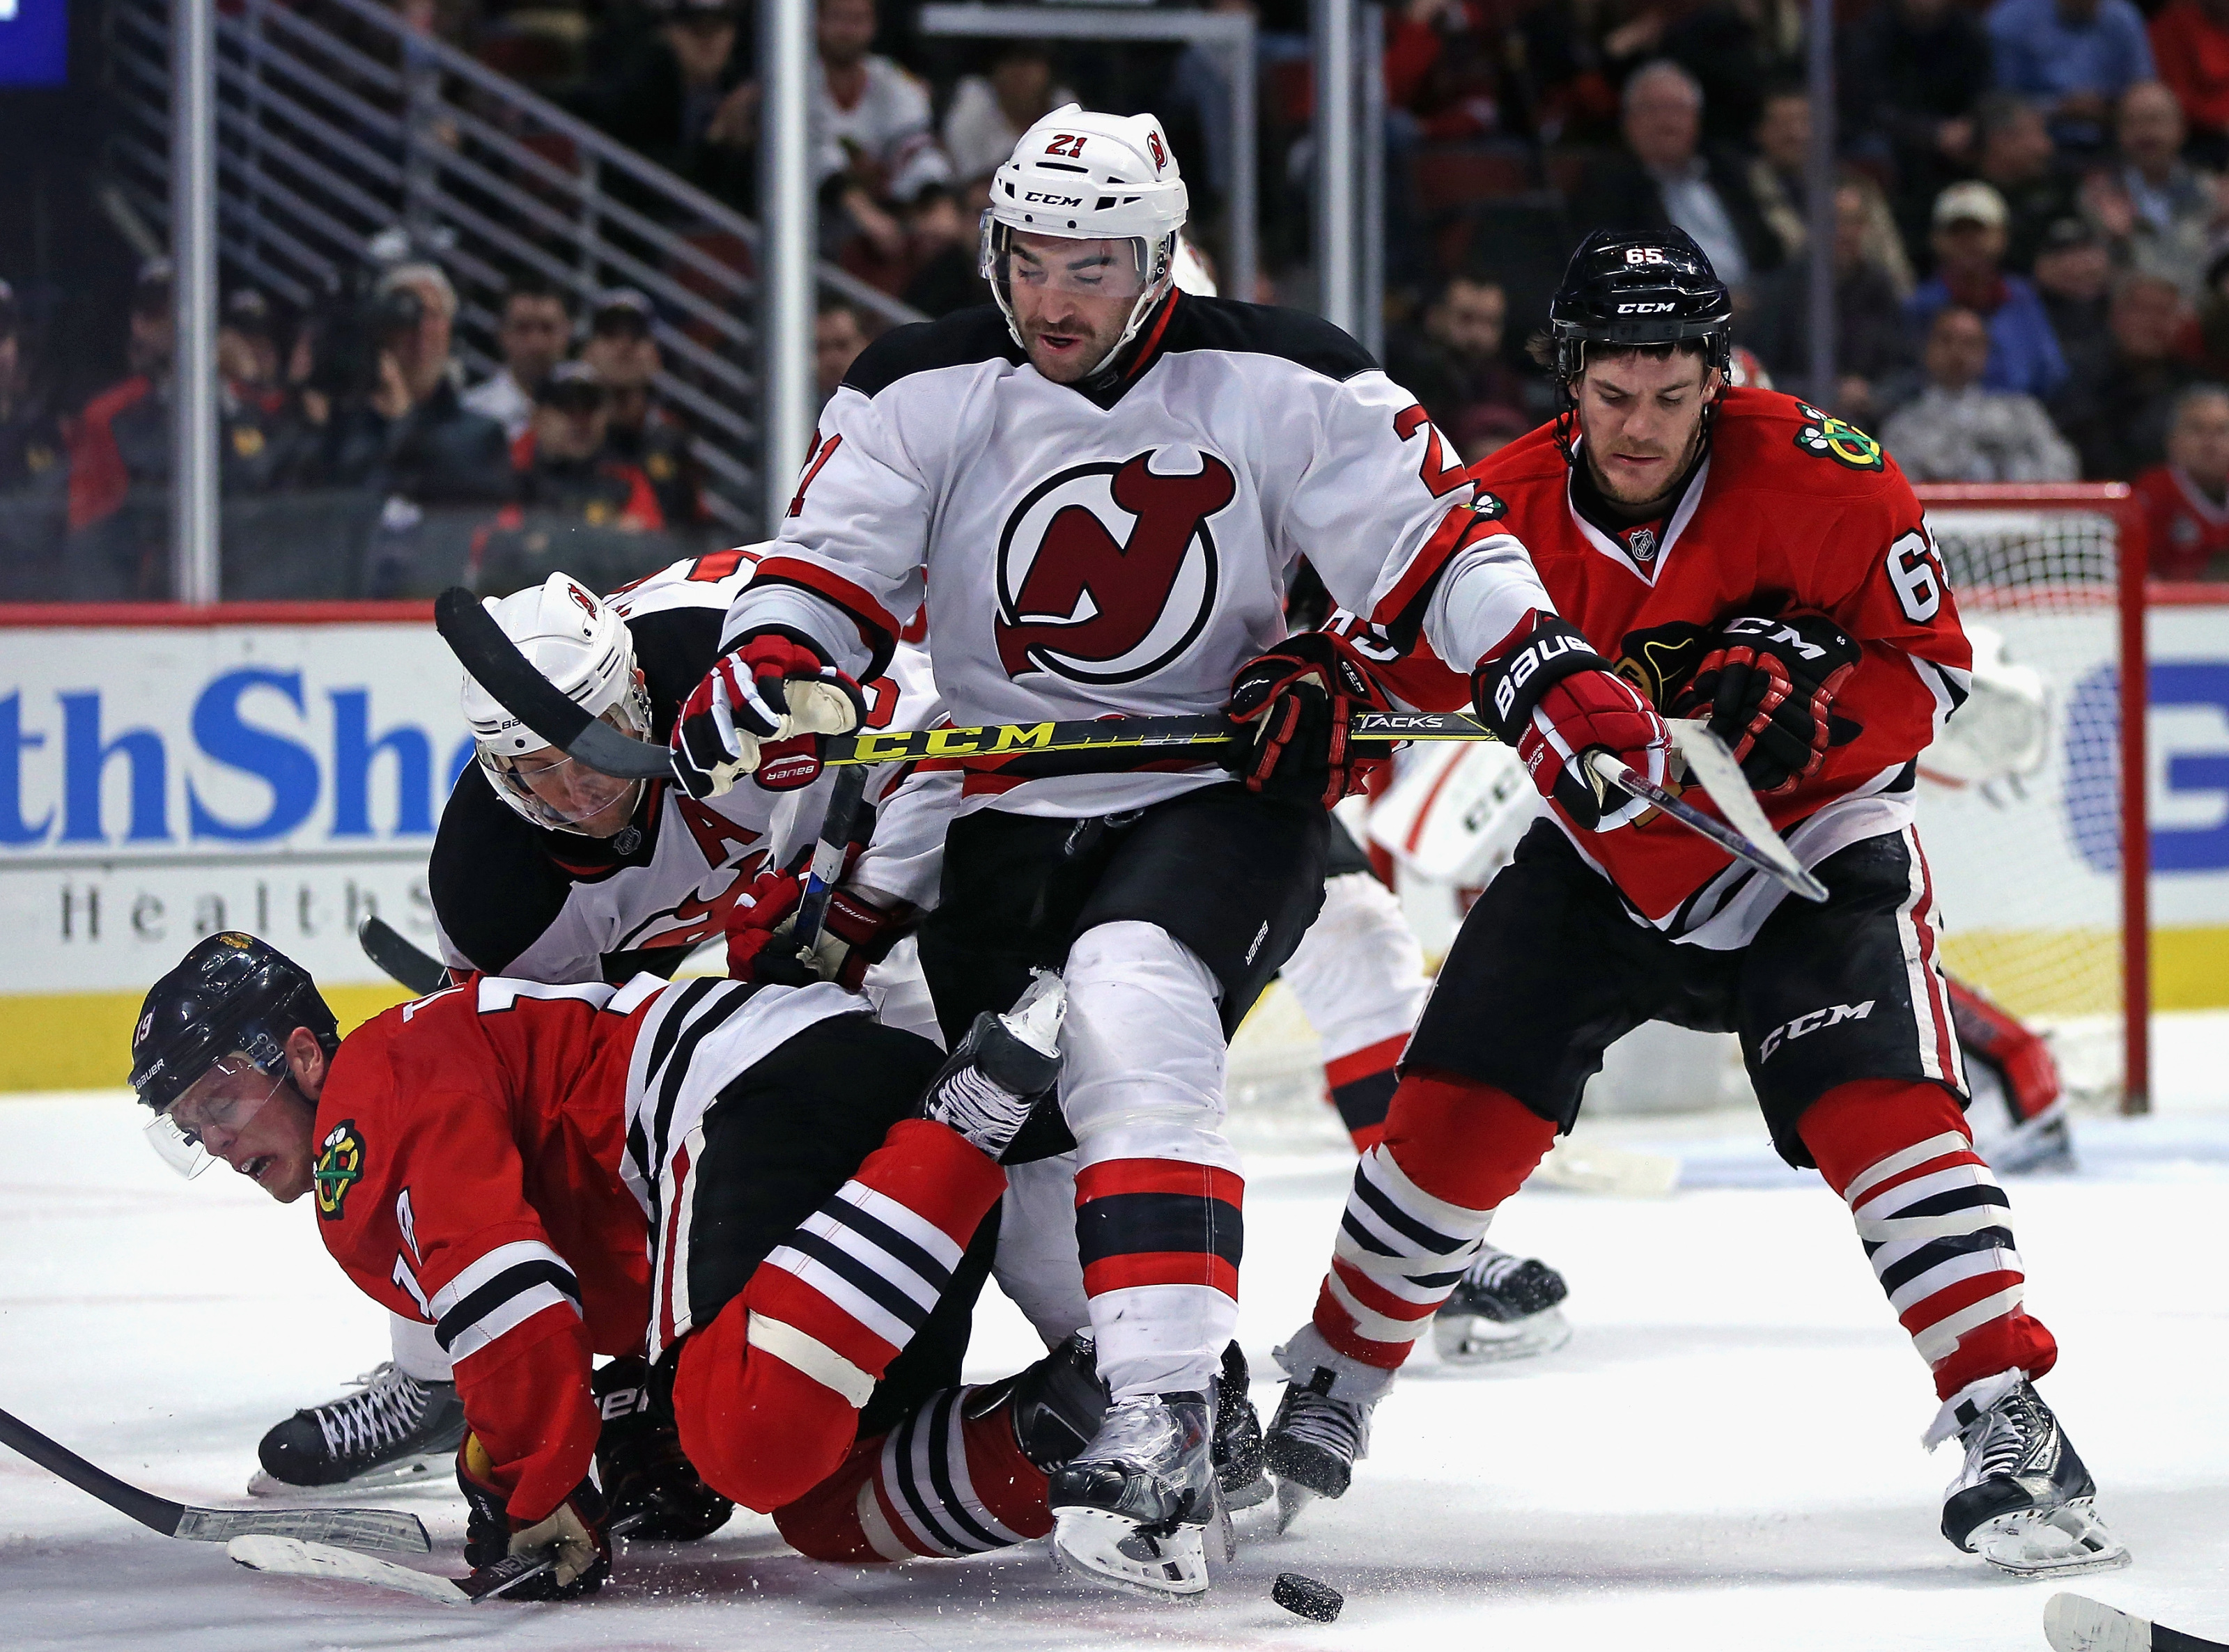 Devils beat lowly Blackhawks, move within 3 wins of crazy franchise record